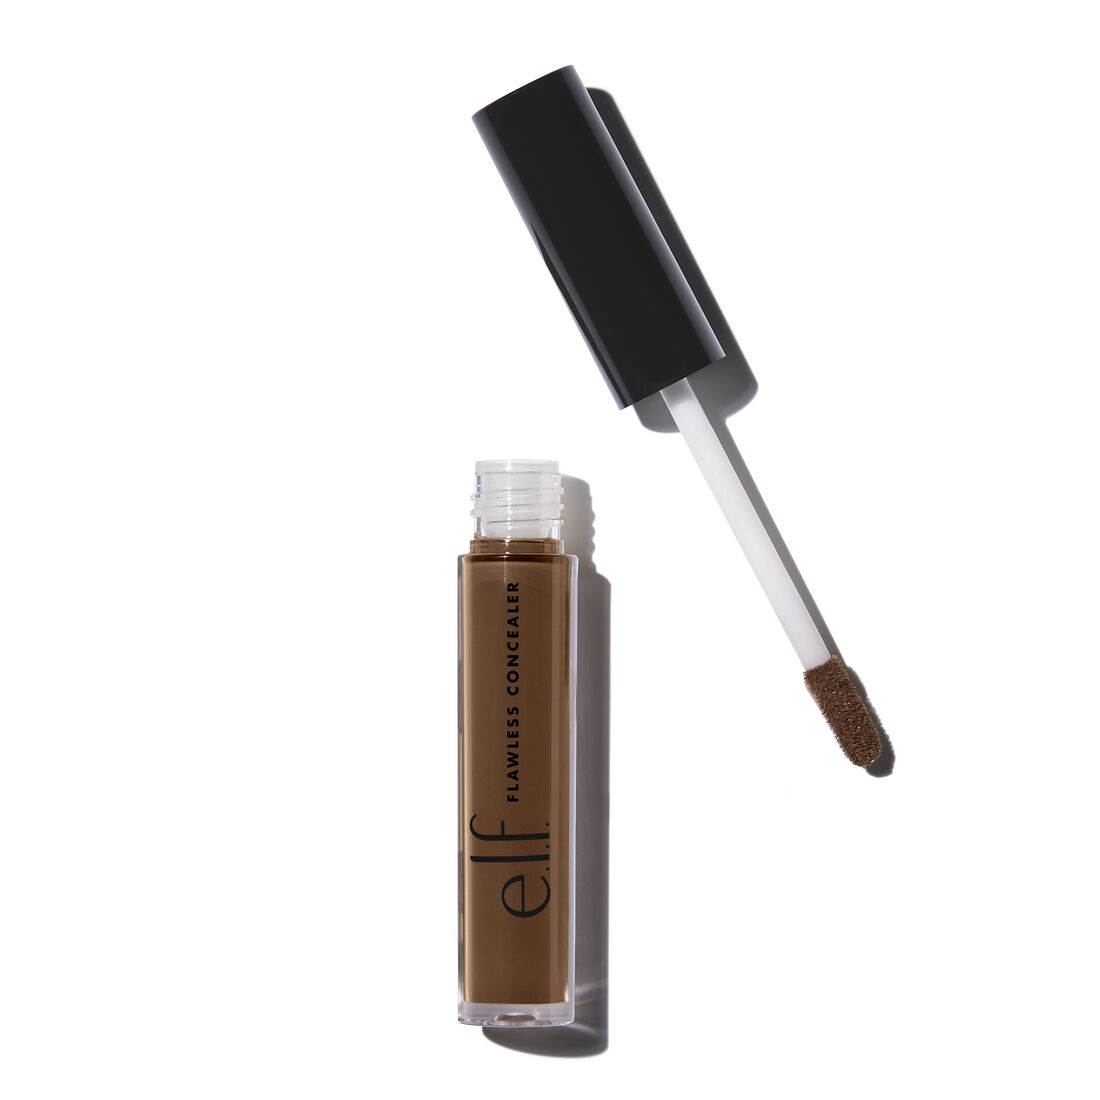 Flawless Concealer, Rich Chocolate - rich with warm undertones